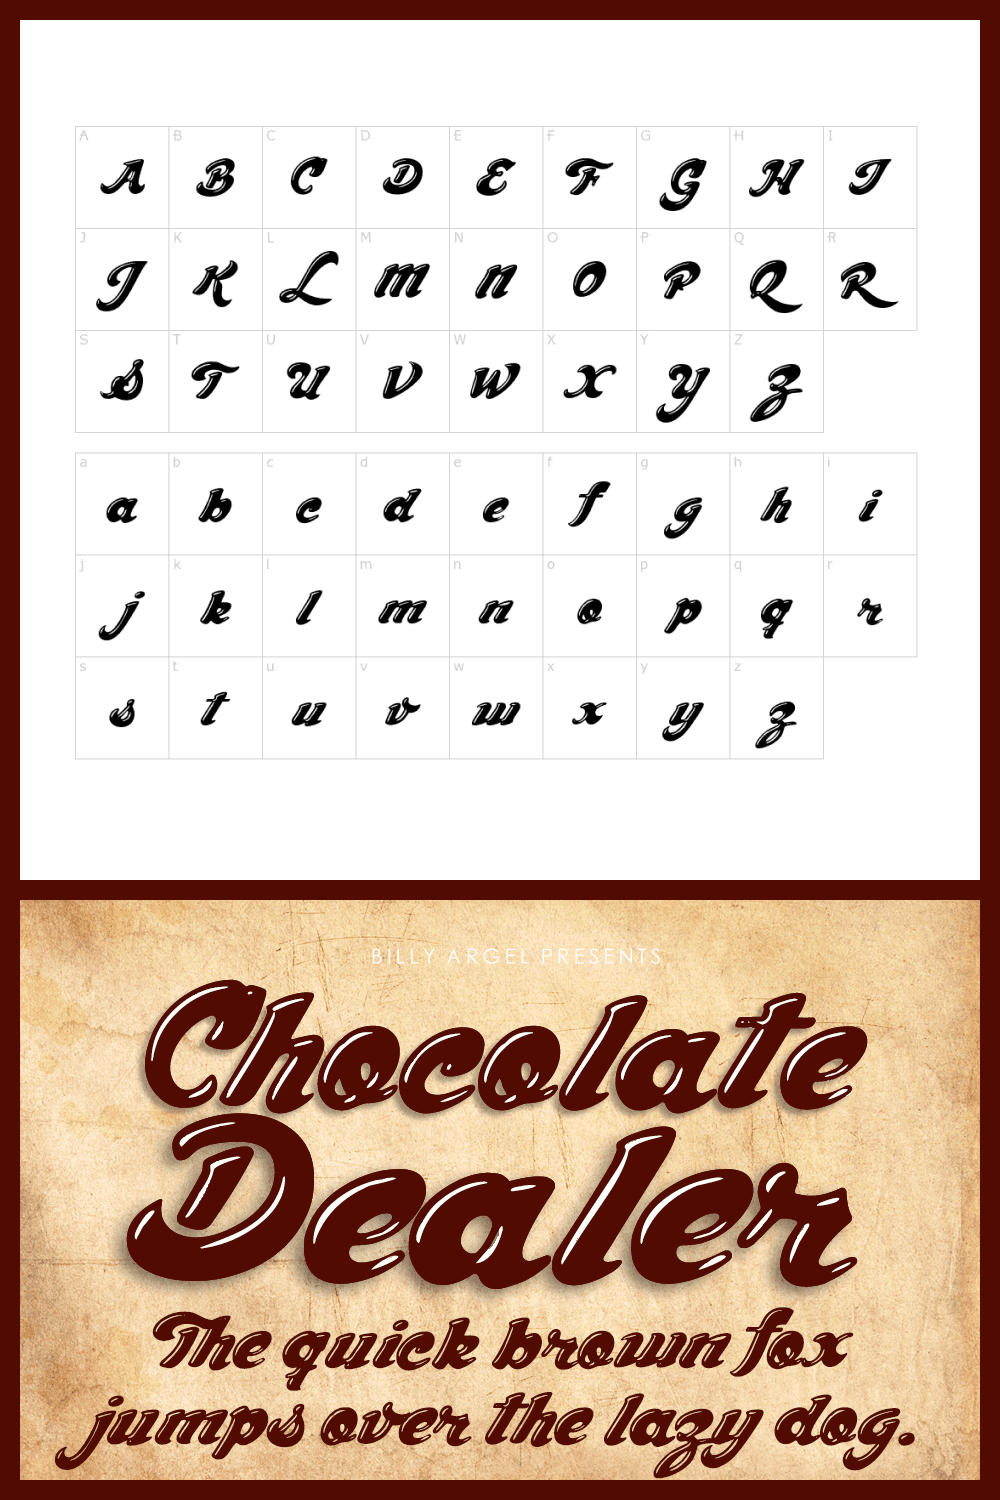 Such a sweet font in brown glossy color.